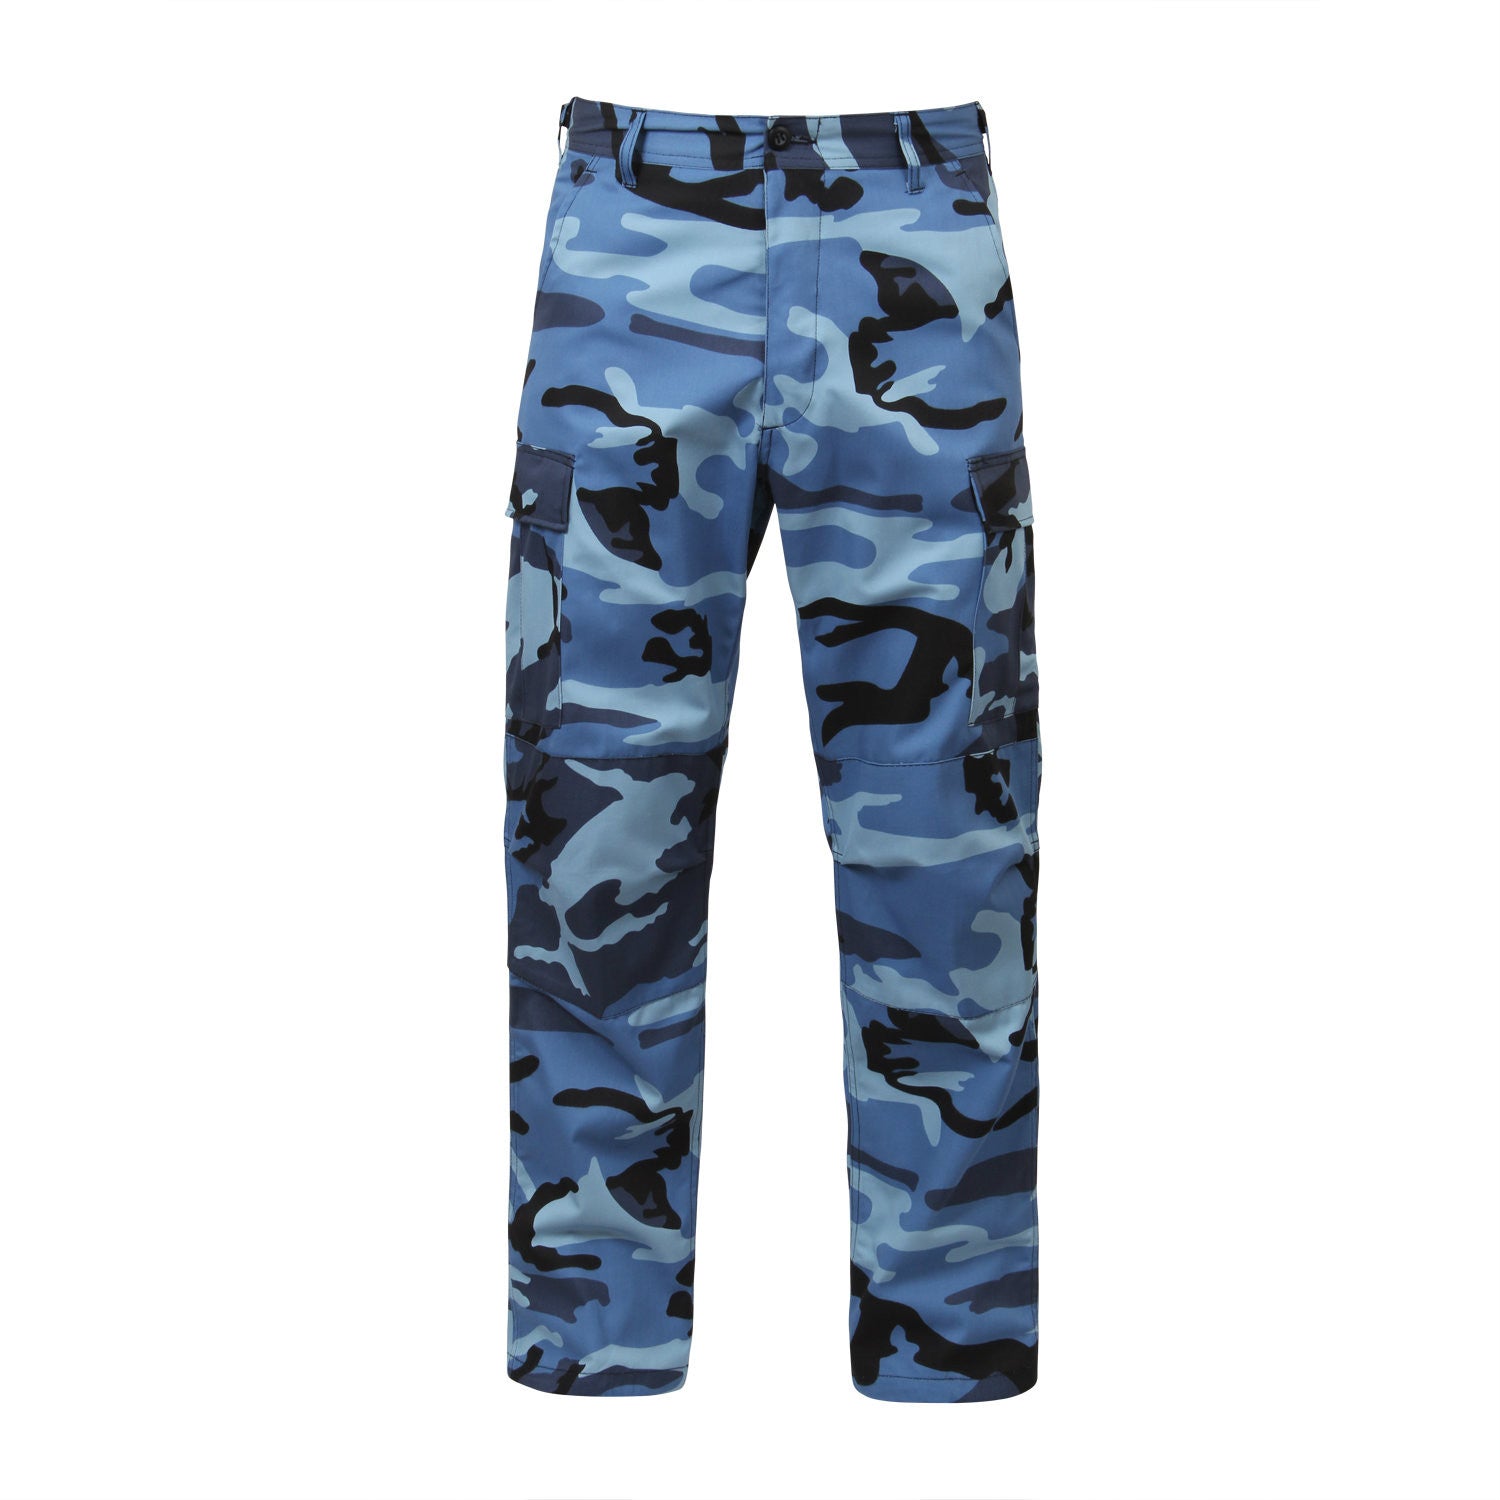 Army Universe Sky Blue Camo Tactical Camouflage Military BDU Cargo